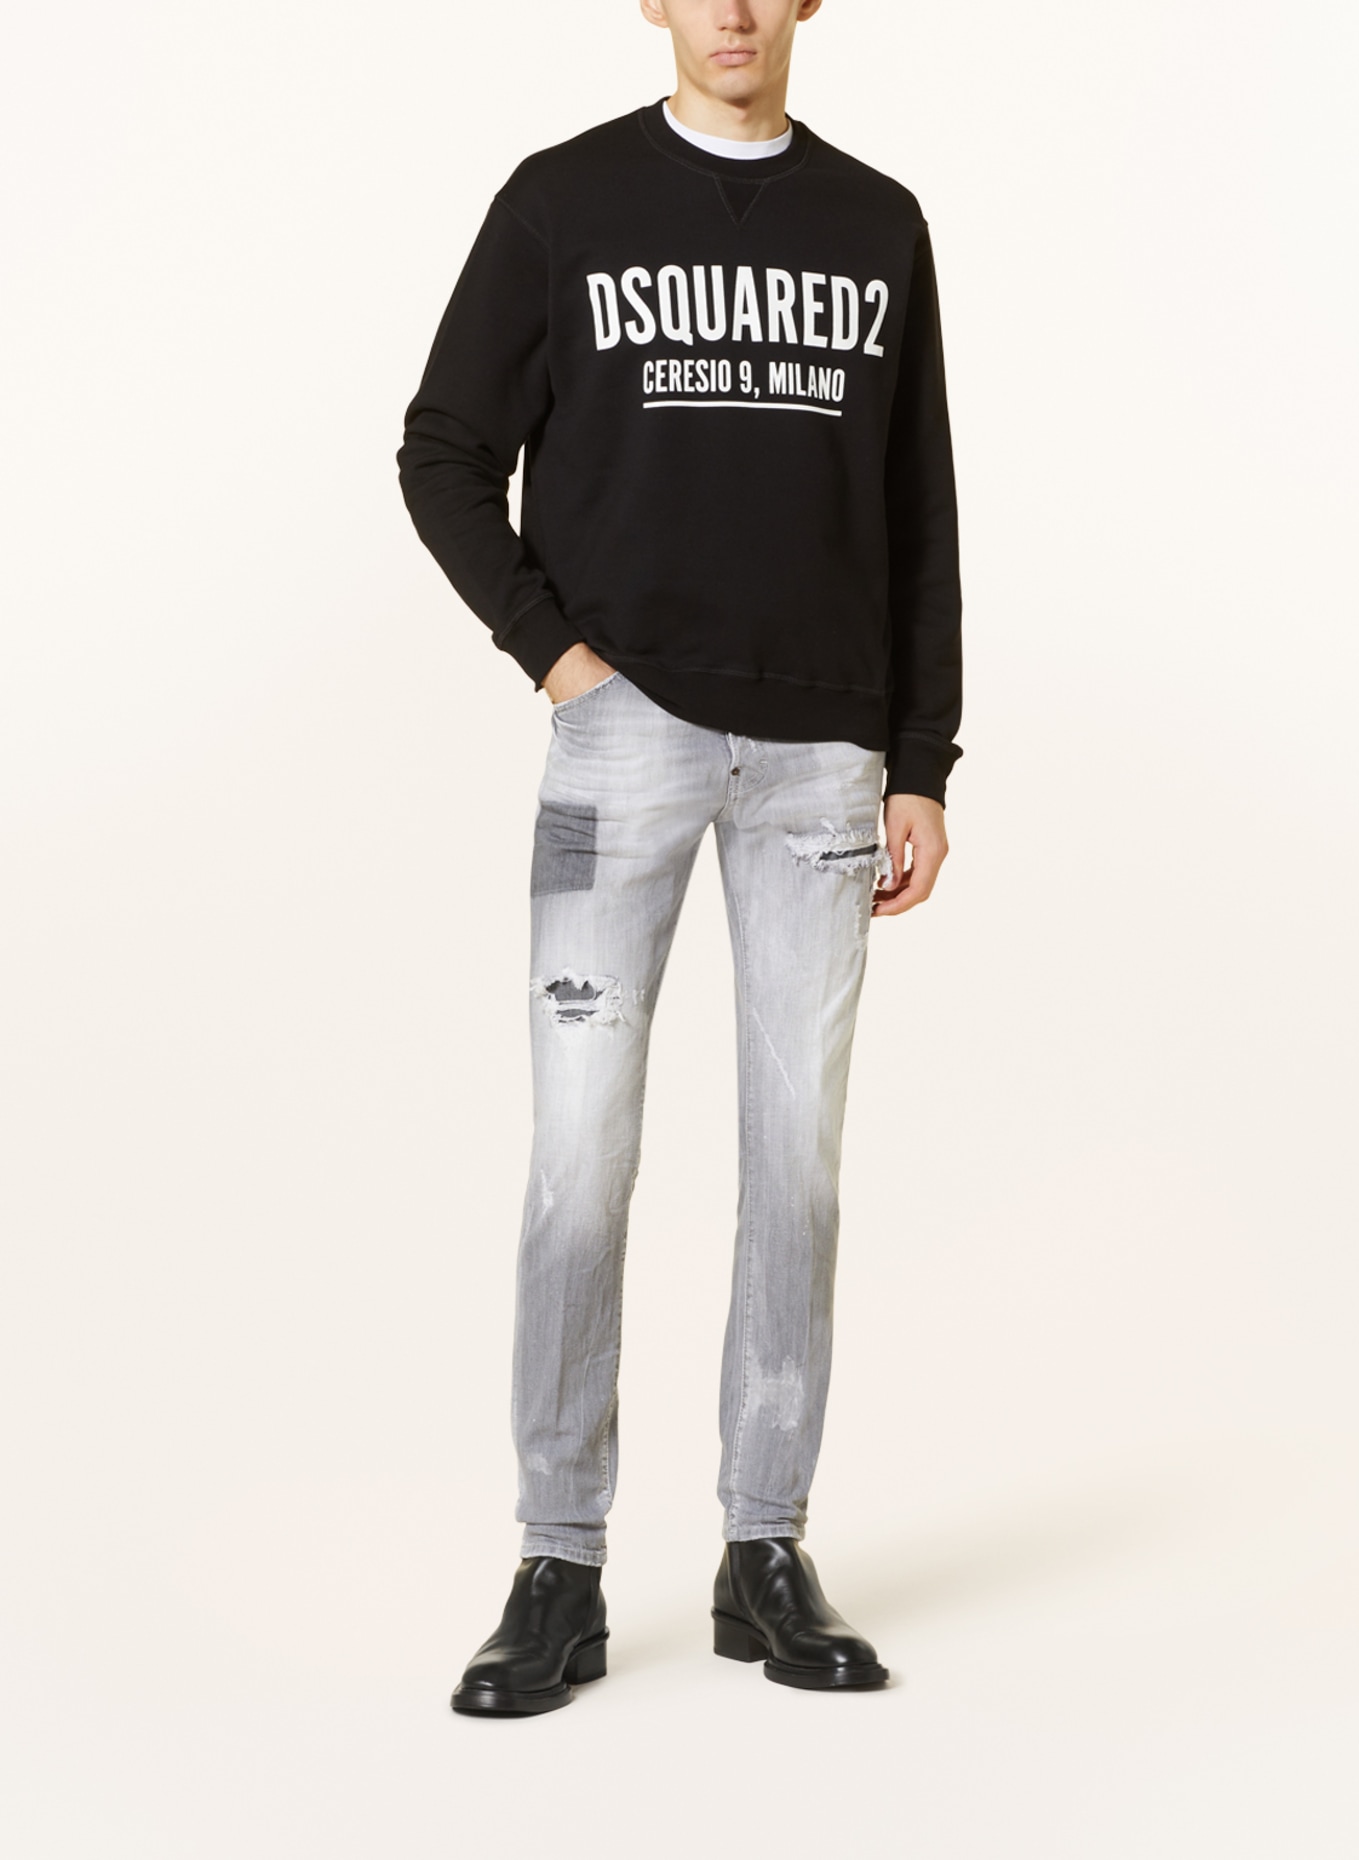 DSQUARED2 Destroyed Jeans COOL GUY Extra Slim Fit, Farbe: 852 GREY (Bild 2)